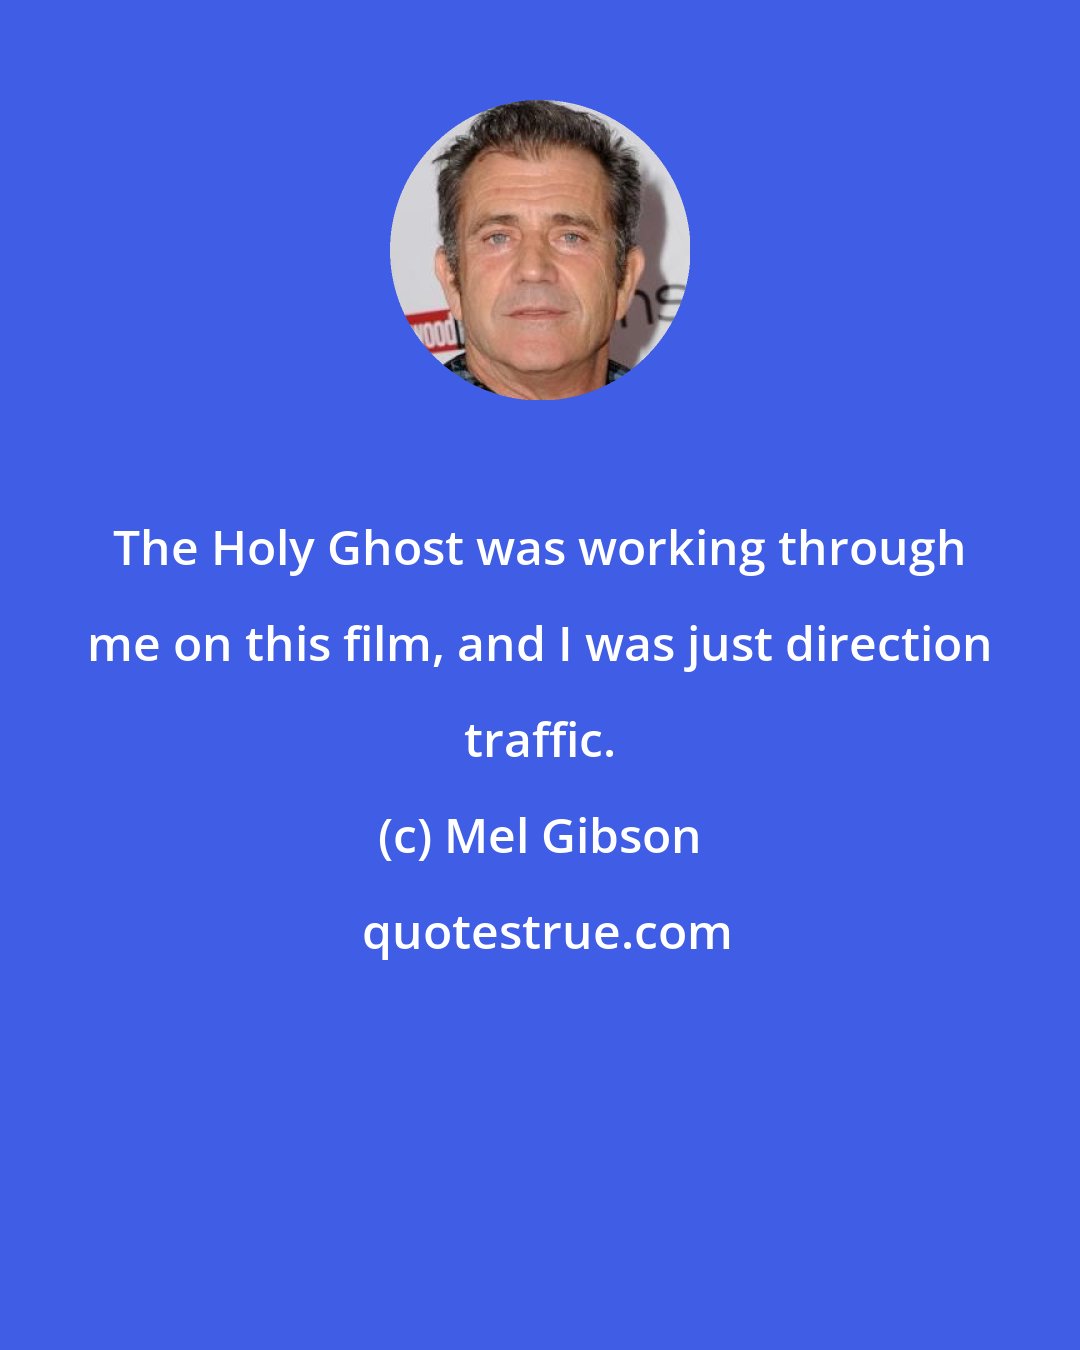 Mel Gibson: The Holy Ghost was working through me on this film, and I was just direction traffic.